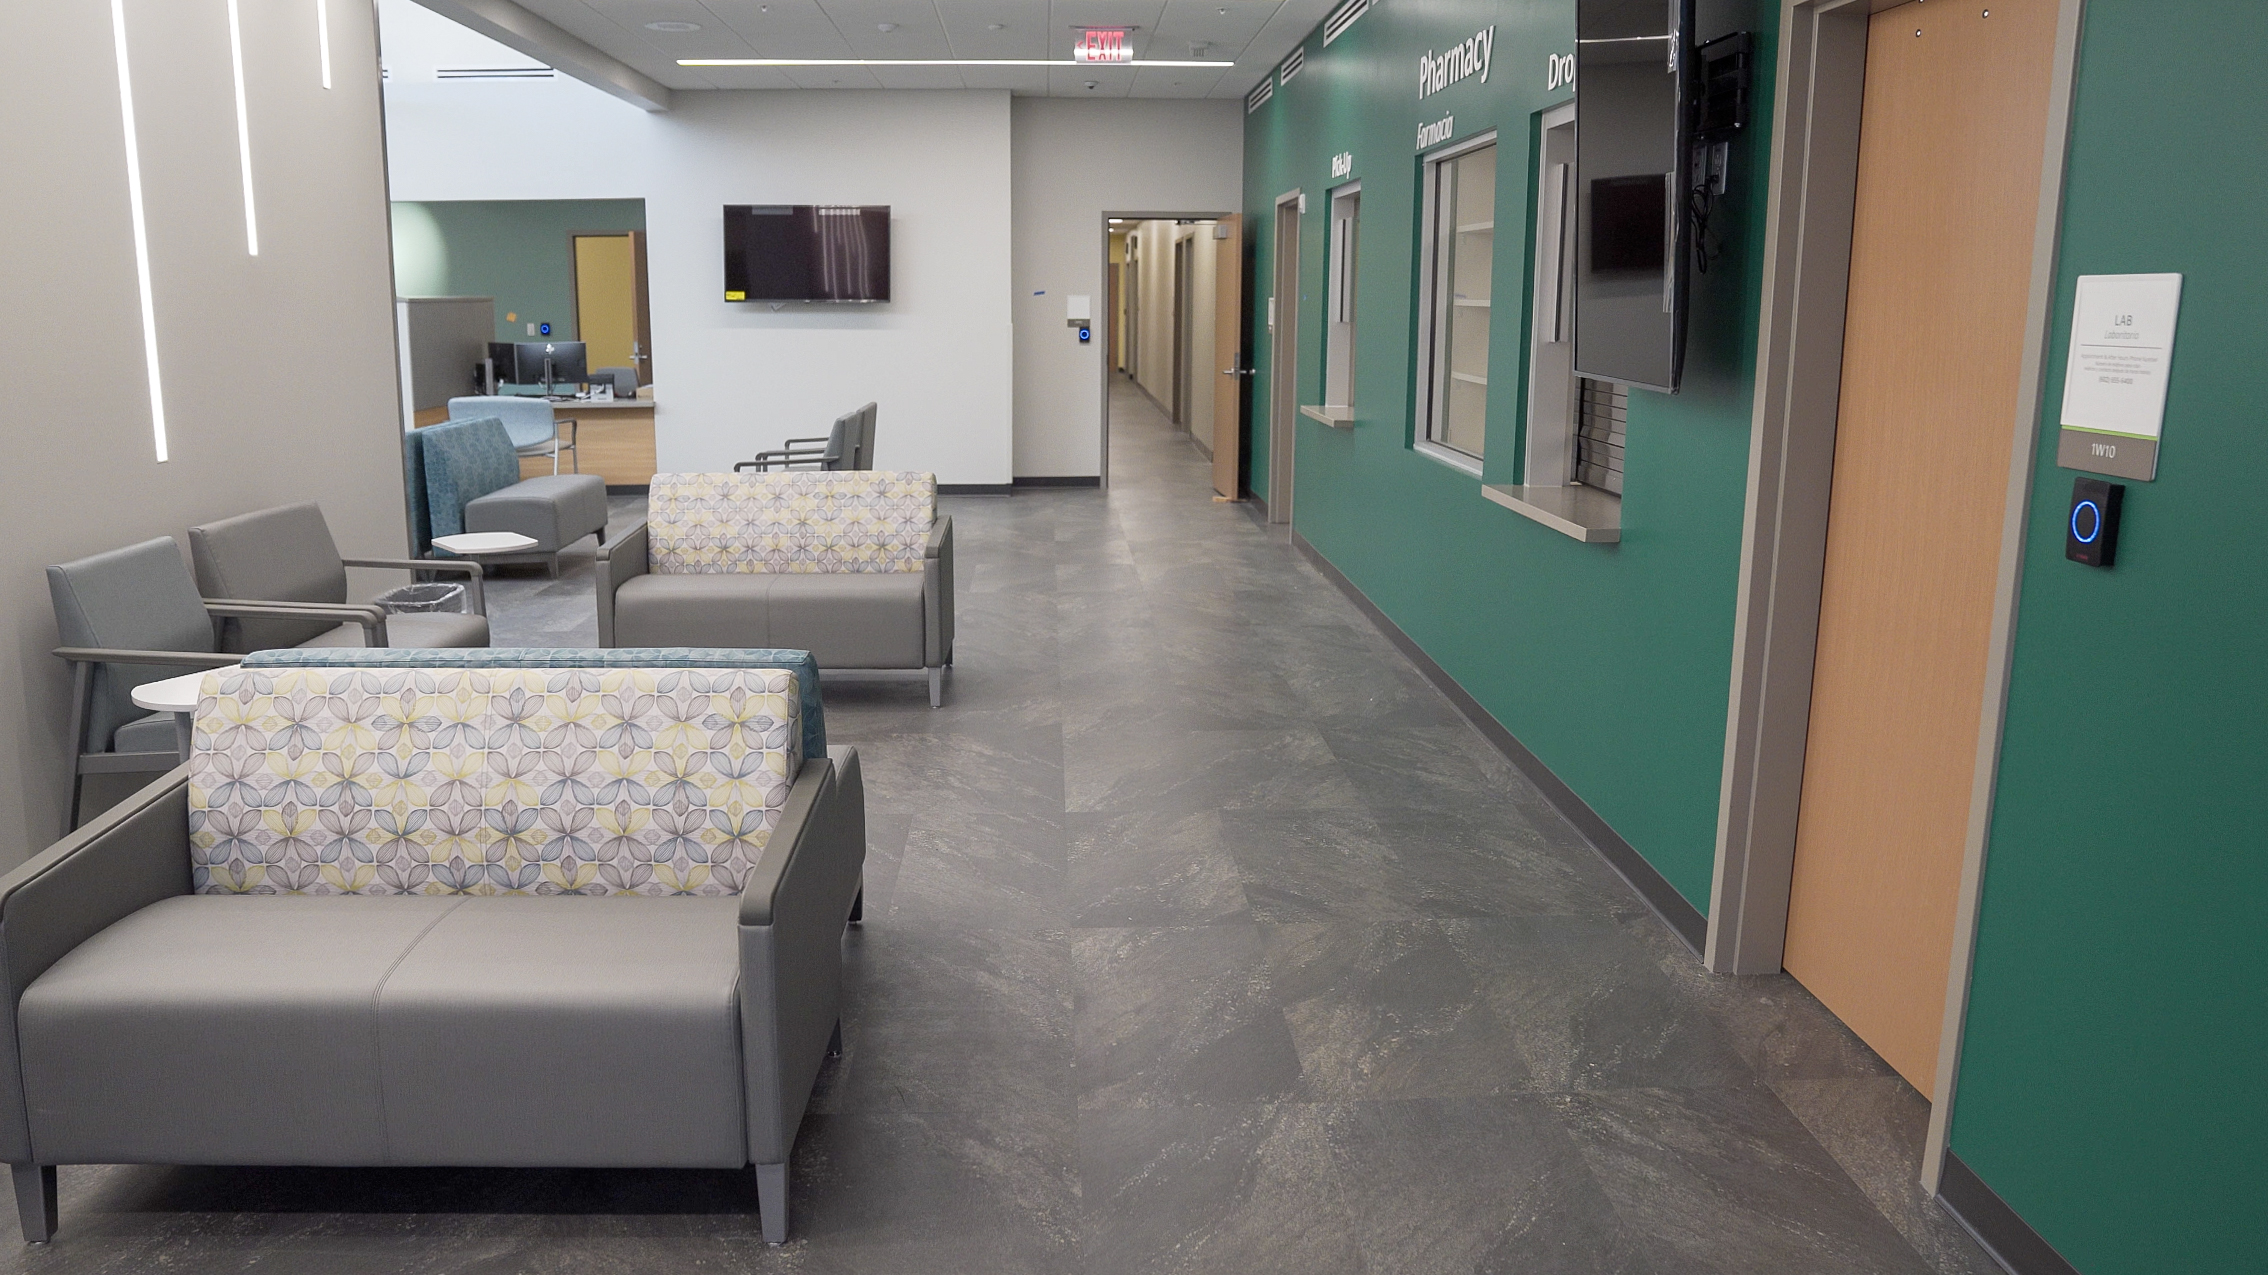 waiting room inside a medical center with gray seats